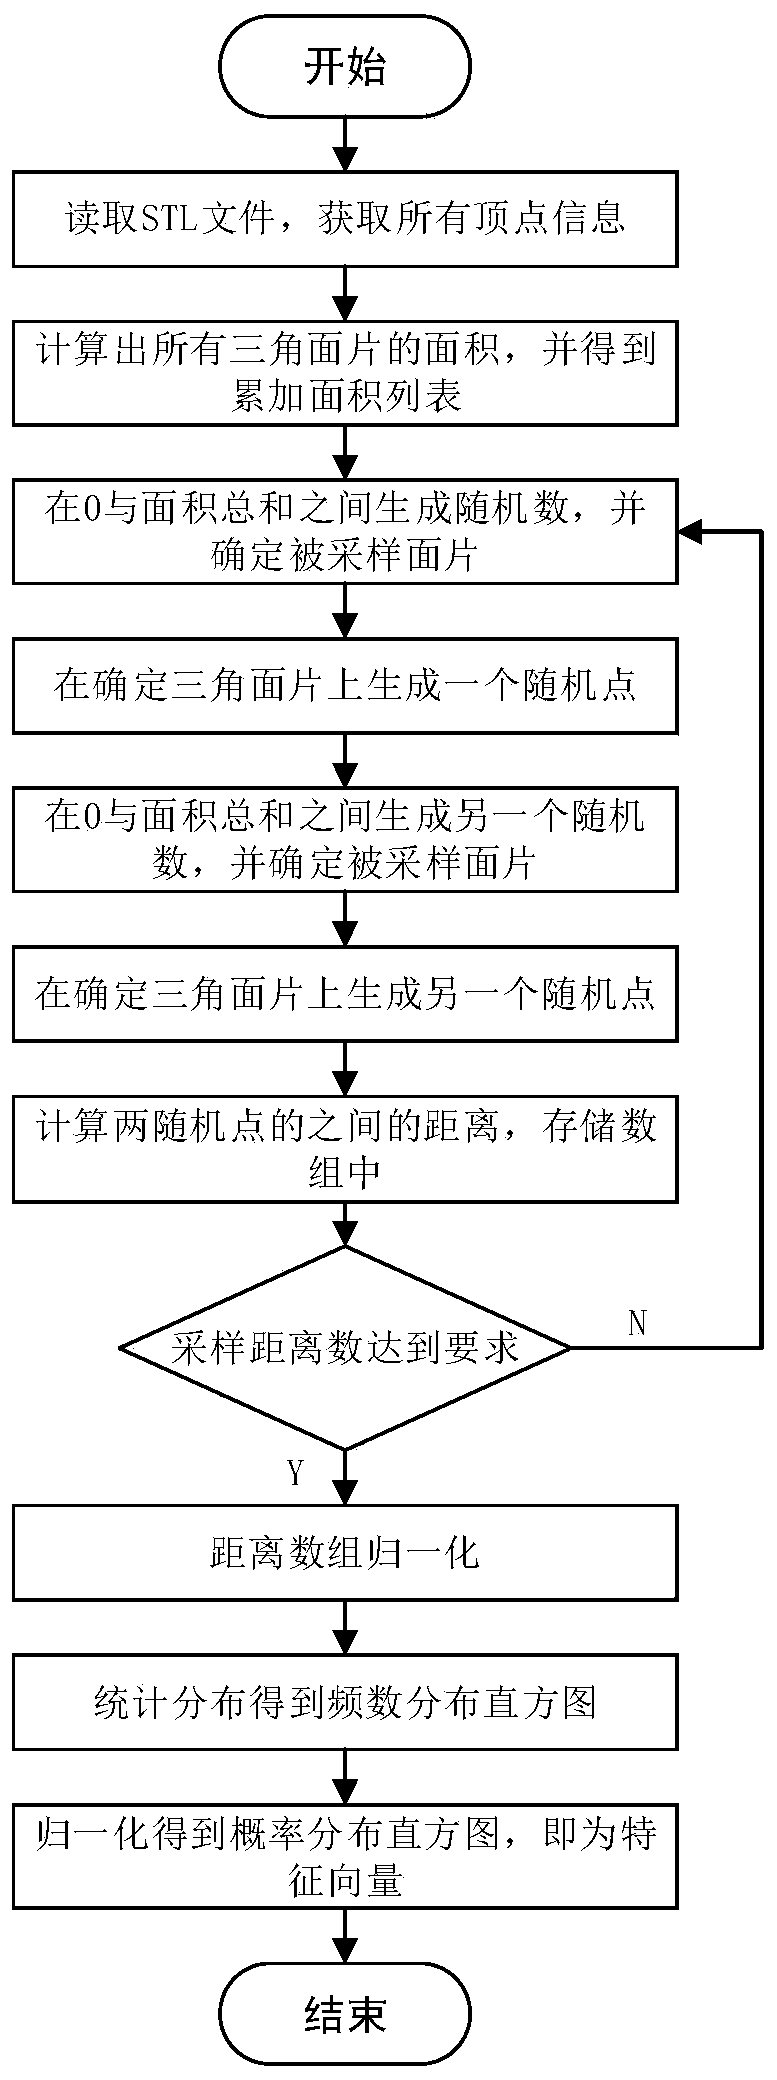 Casting three-dimensional feature extraction and similarity measurement method in combination with process parameters